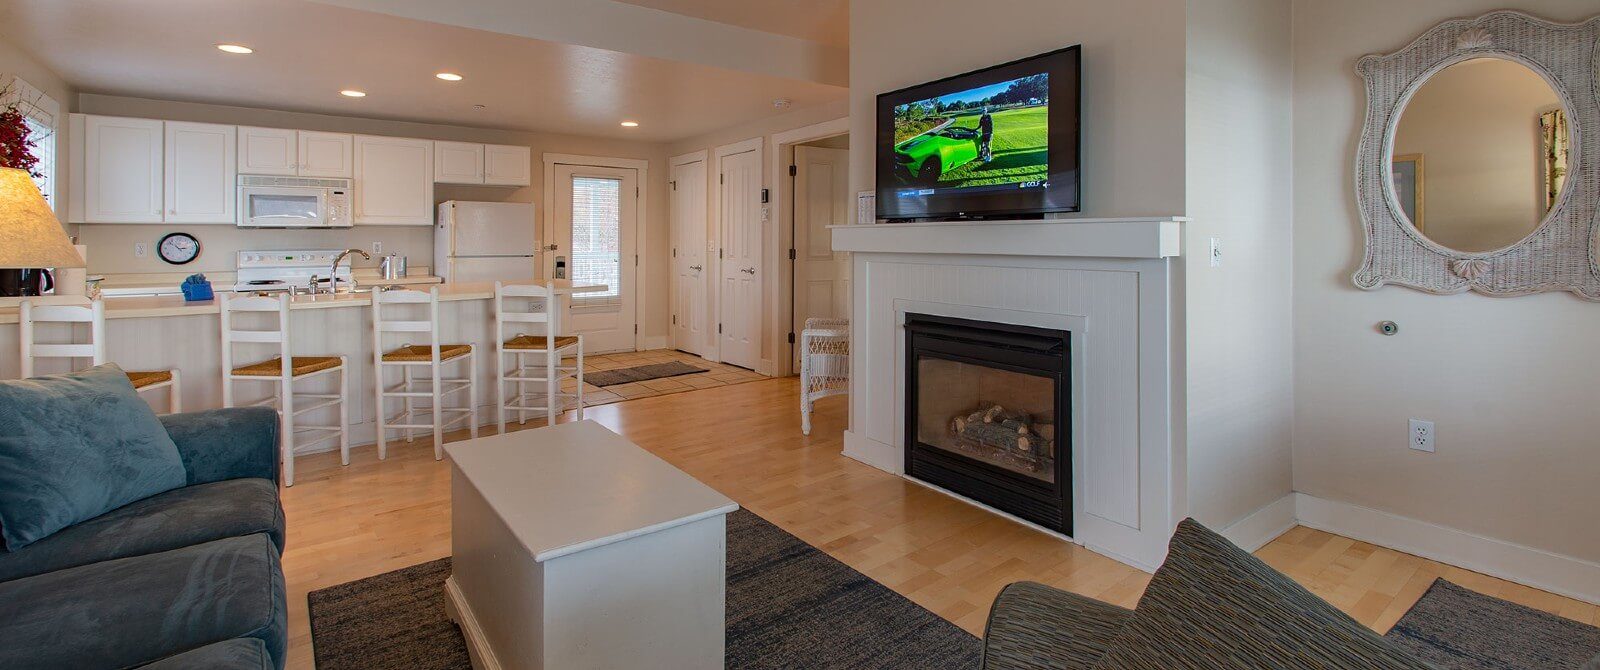 Suite with white kitchen, hardwood floors, couch and chair in front of gas fireplace with TV on the mantle